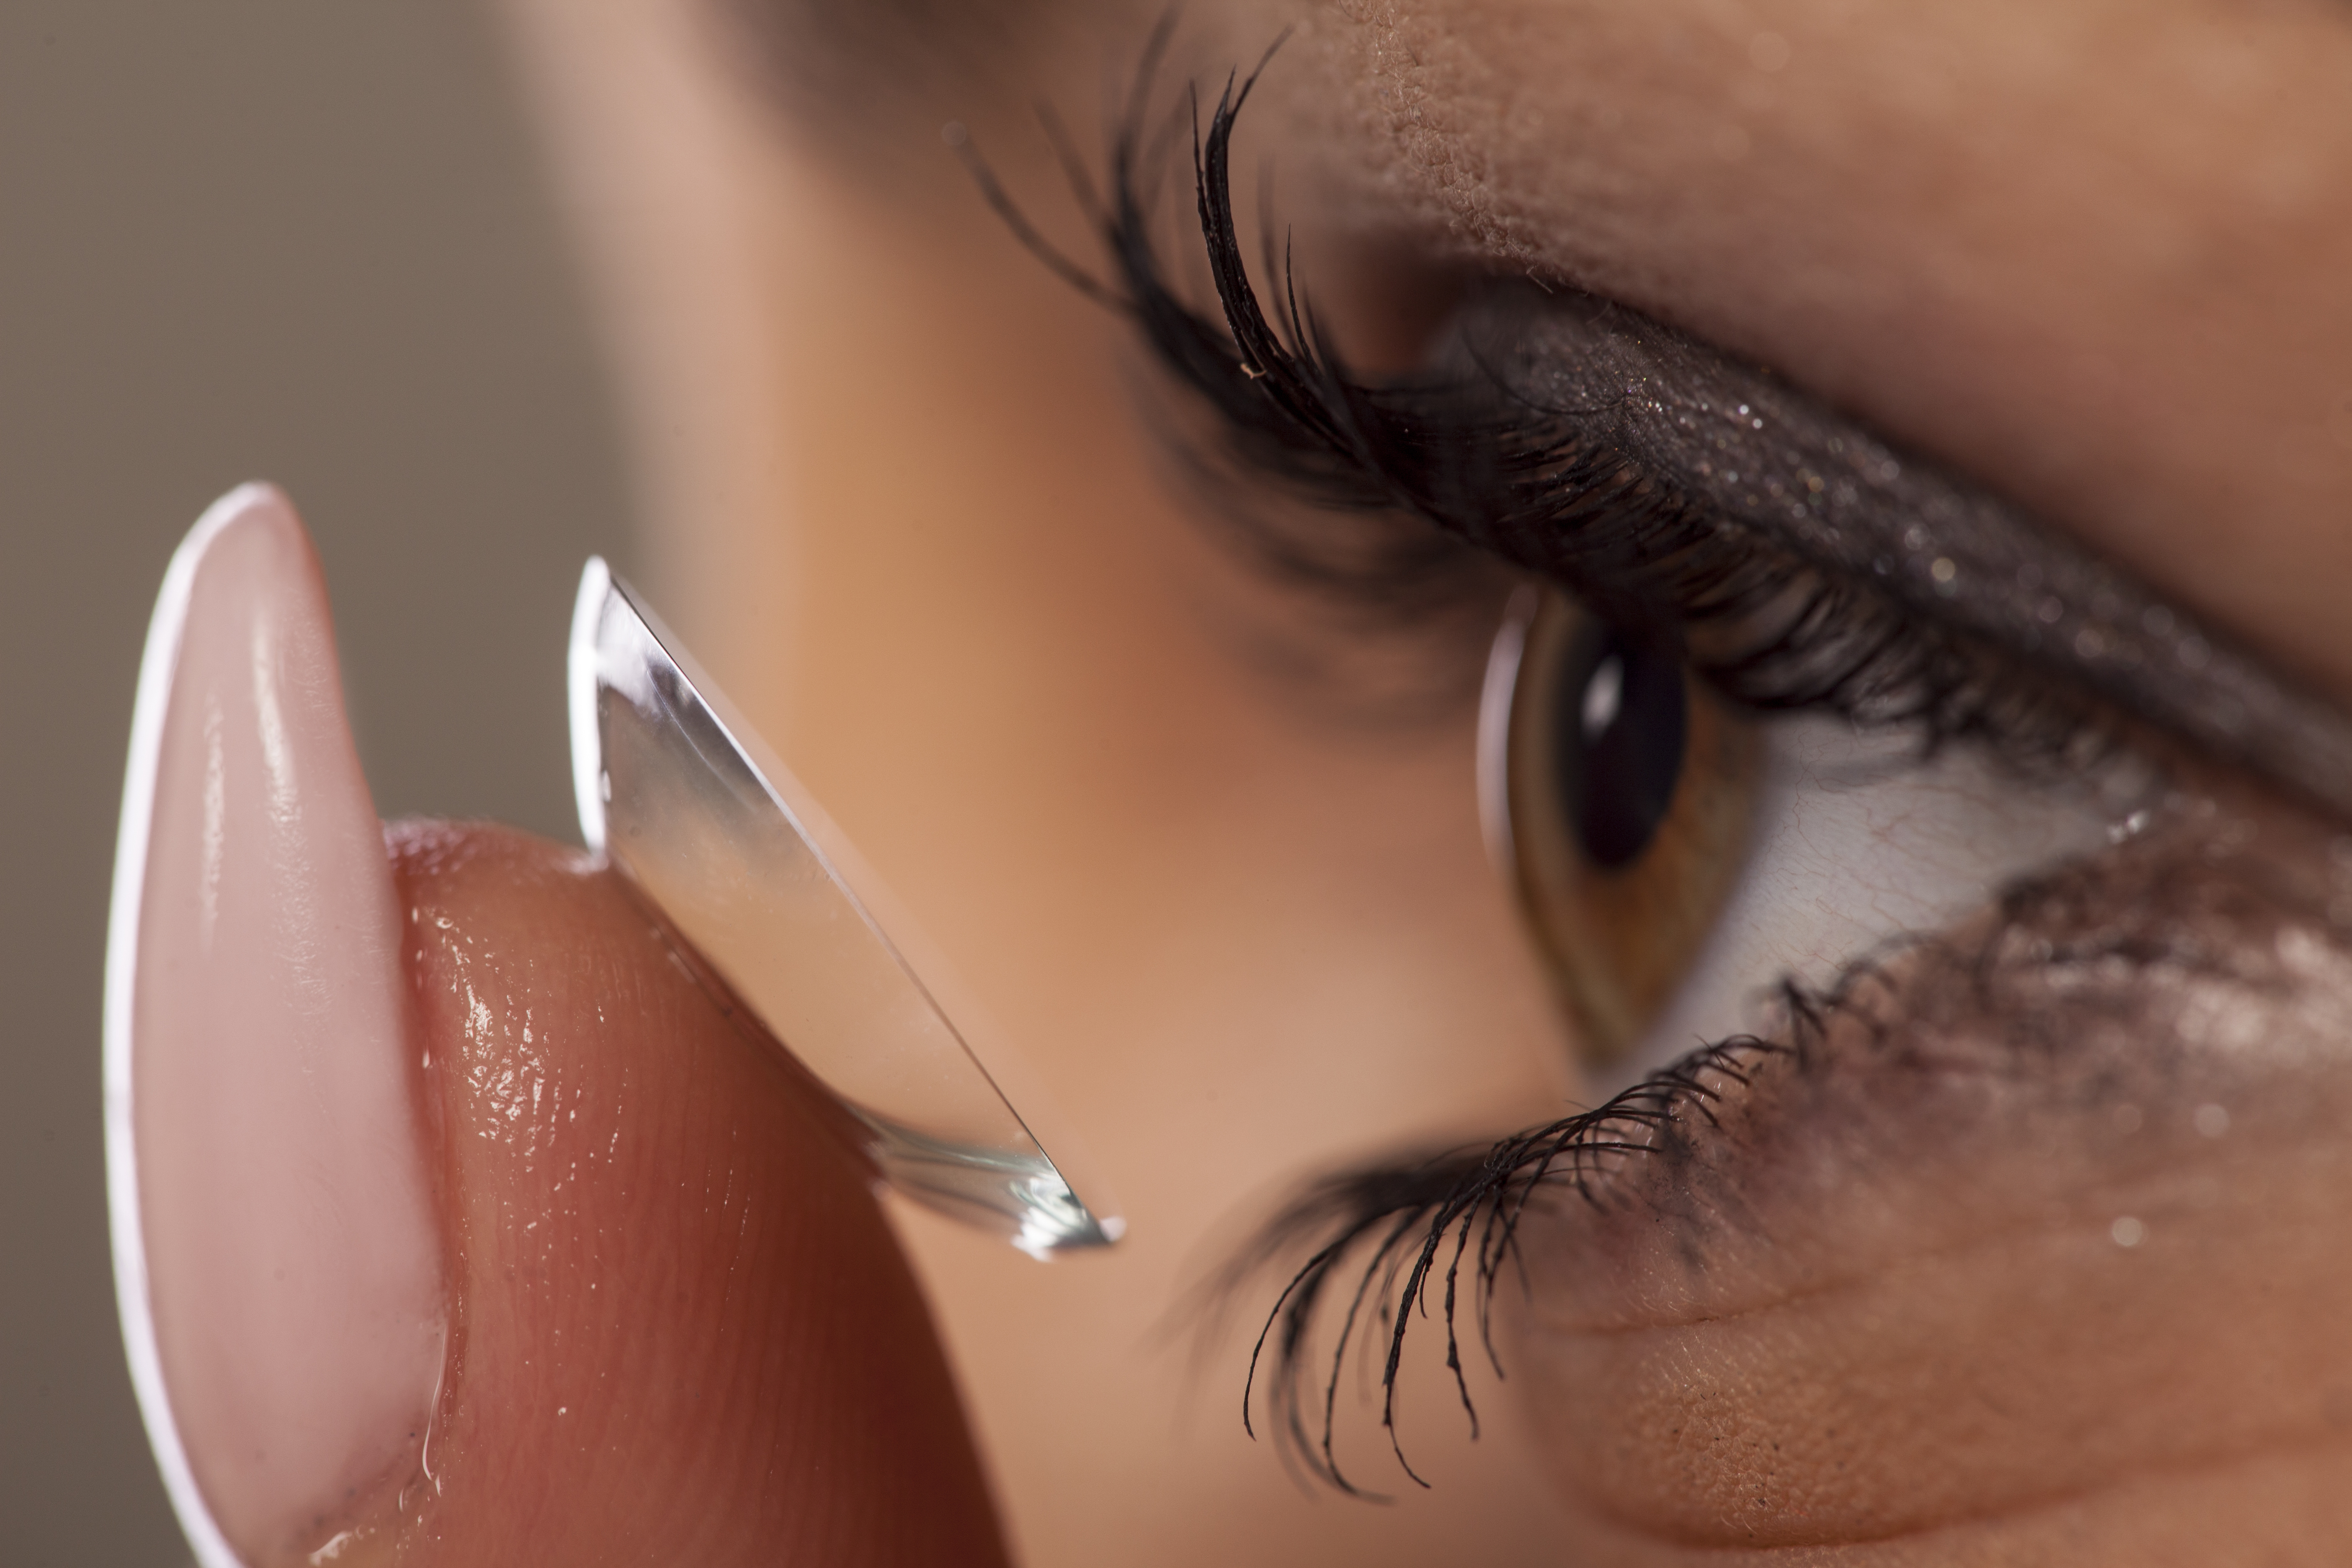 the-10-best-contact-lenses-sites-in-2020-sitejabber-consumer-reviews